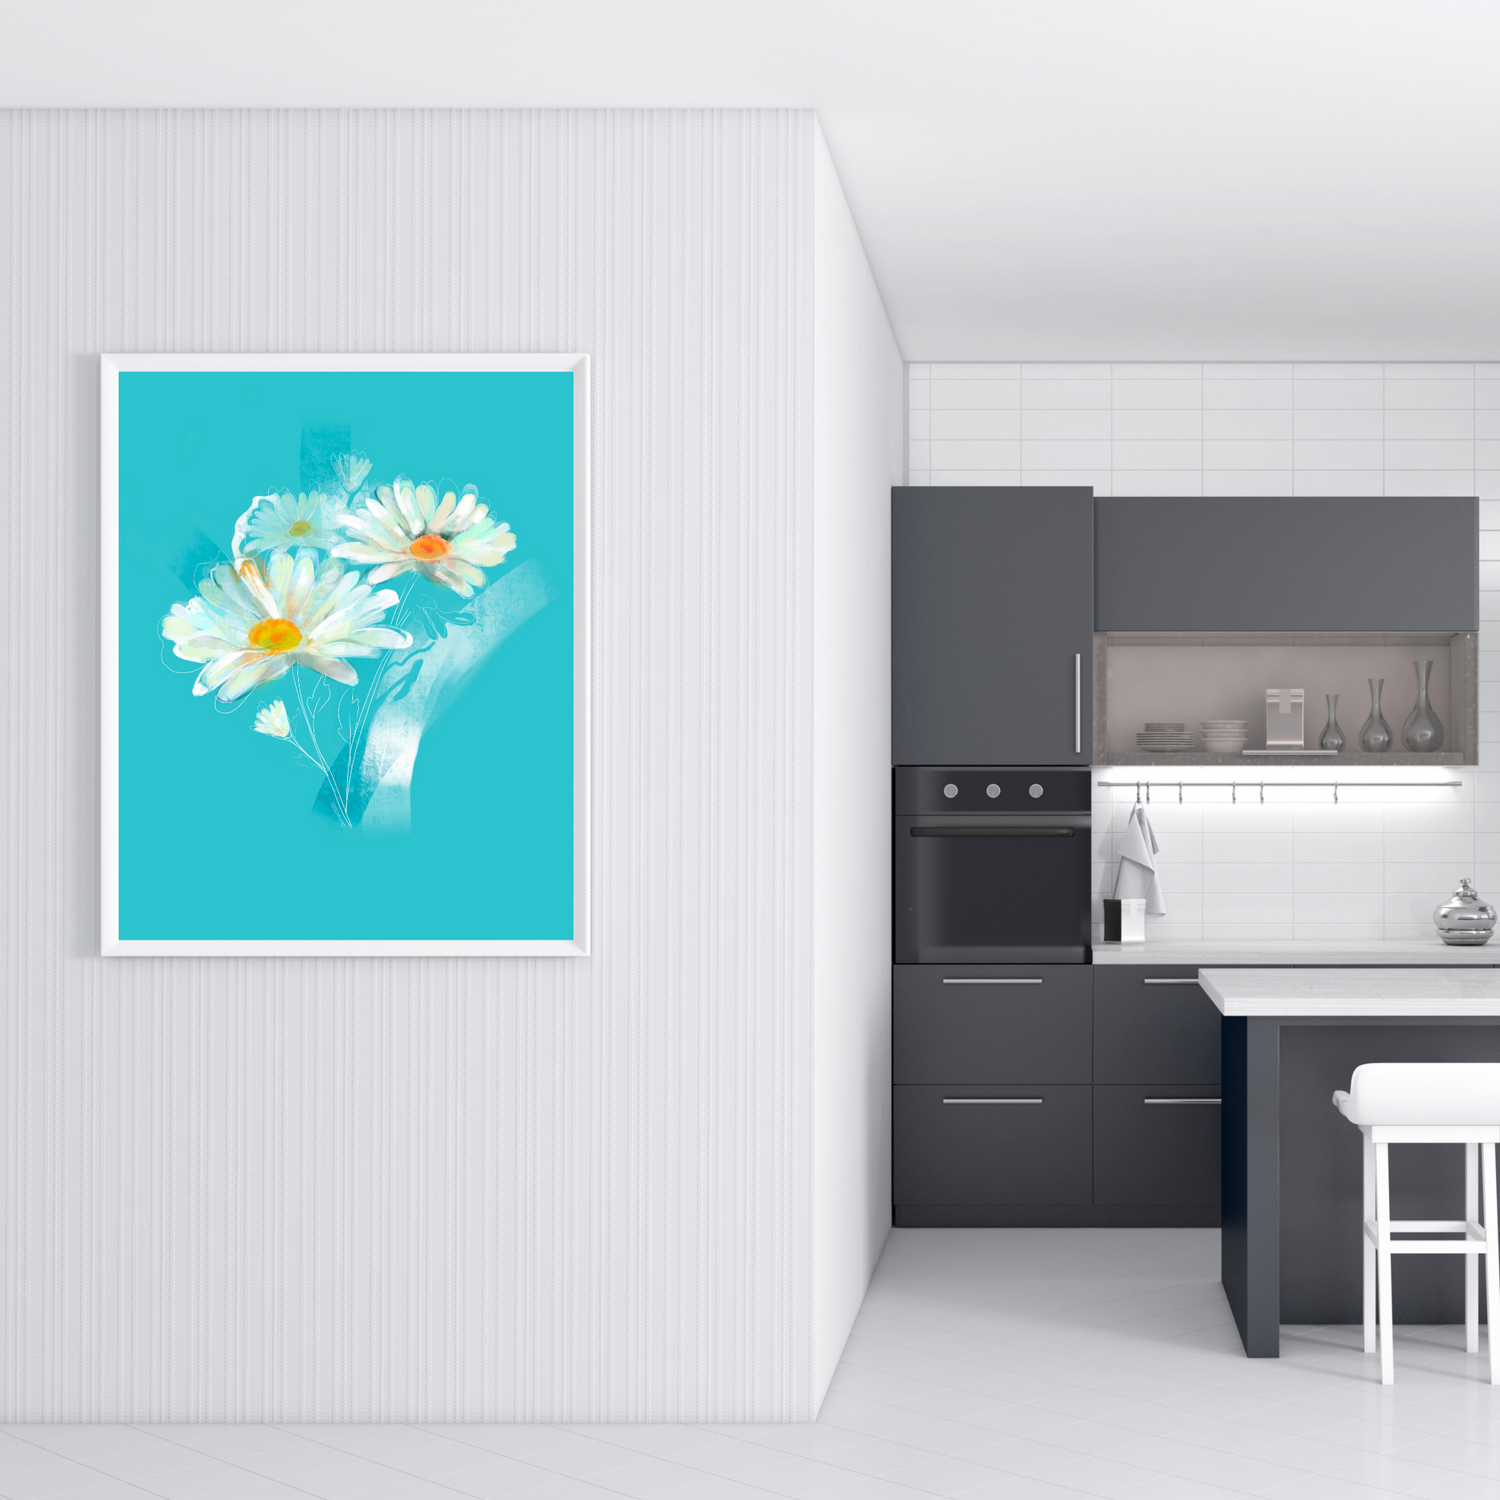 An example of the Daisy painting  by ArisaTeam in a kitchen